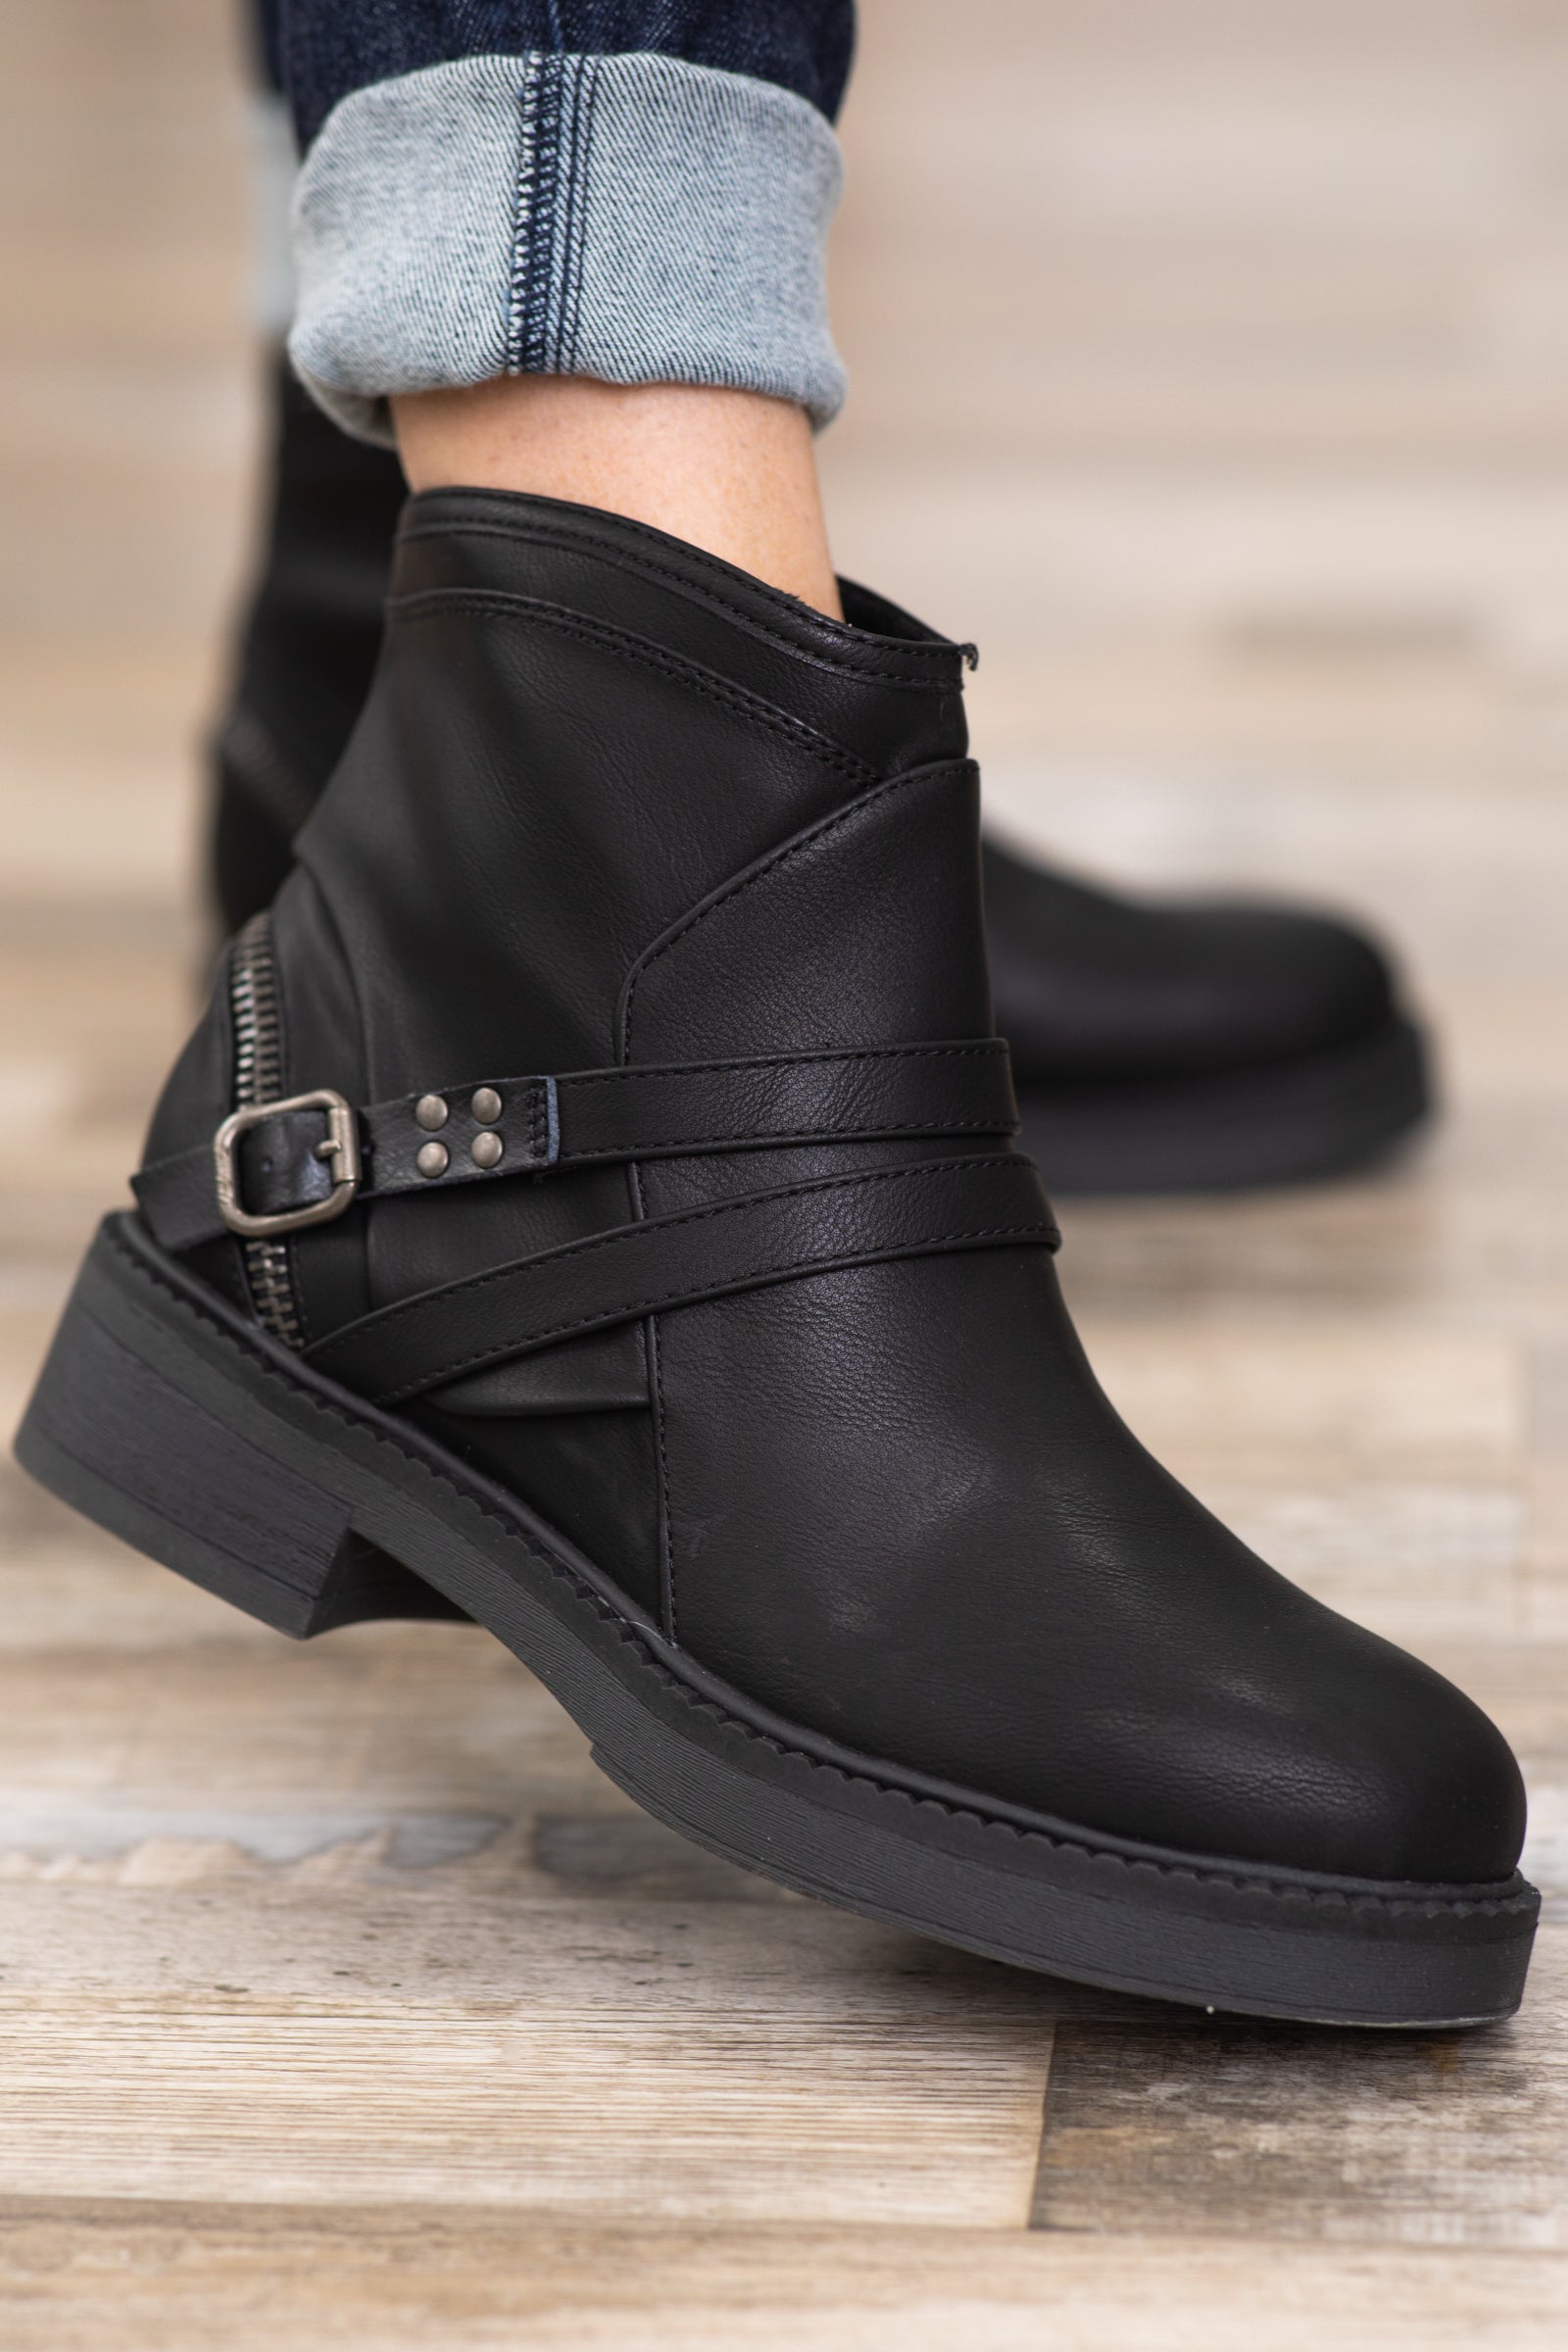 Black Vegan Leather Booties With Buckle Detail